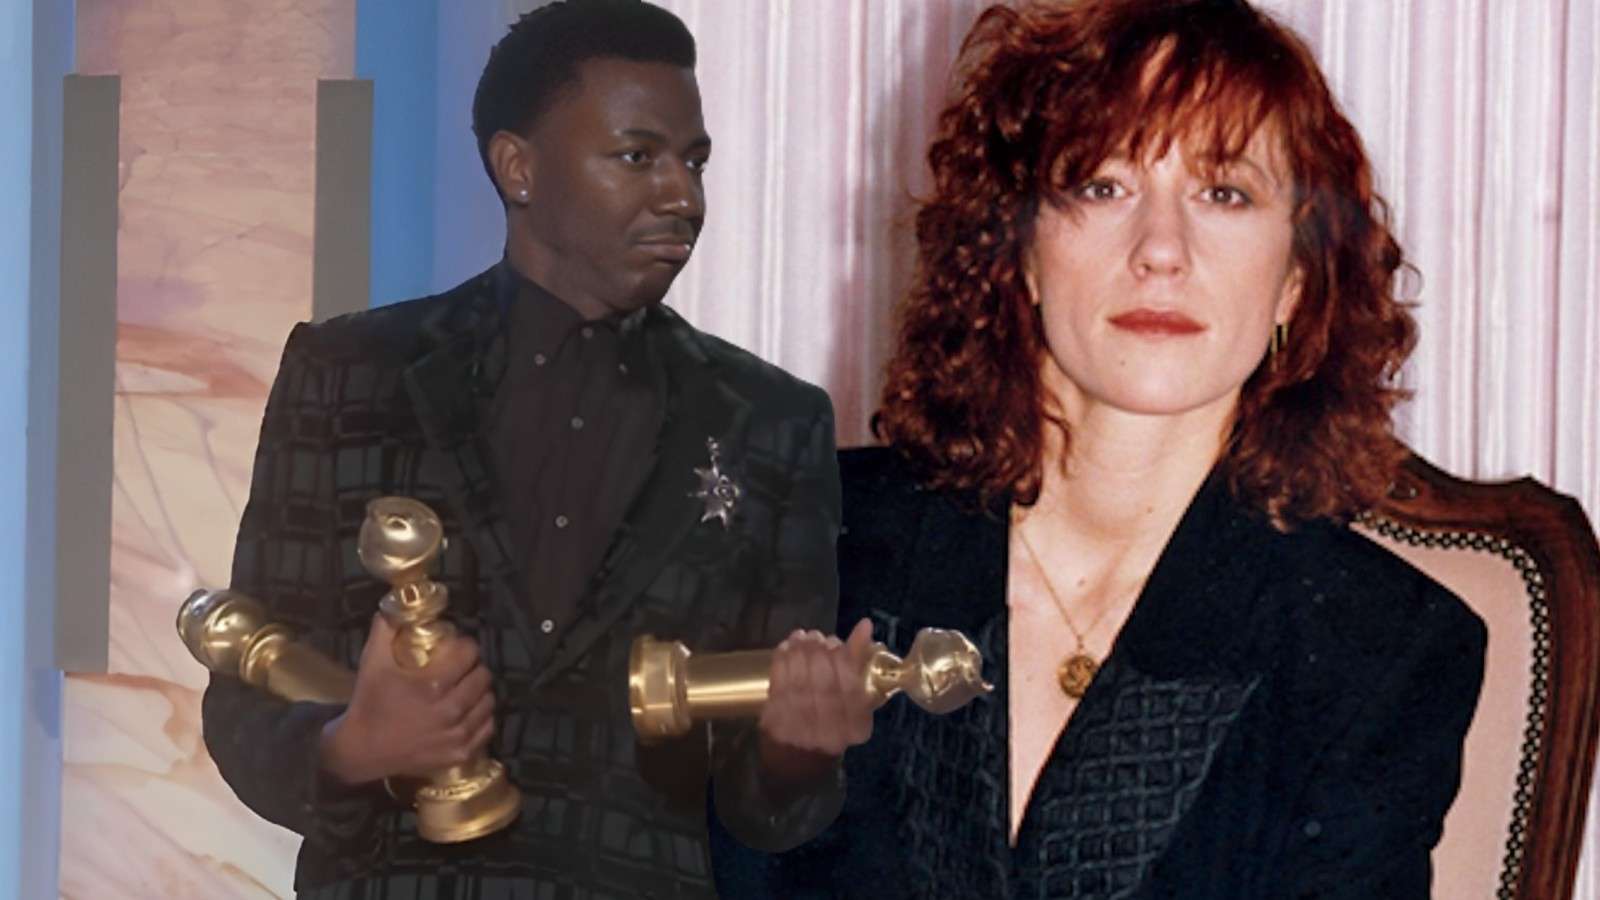 Jerrod Carmichael at the Golden Globes and an image of Shelly Miscavige